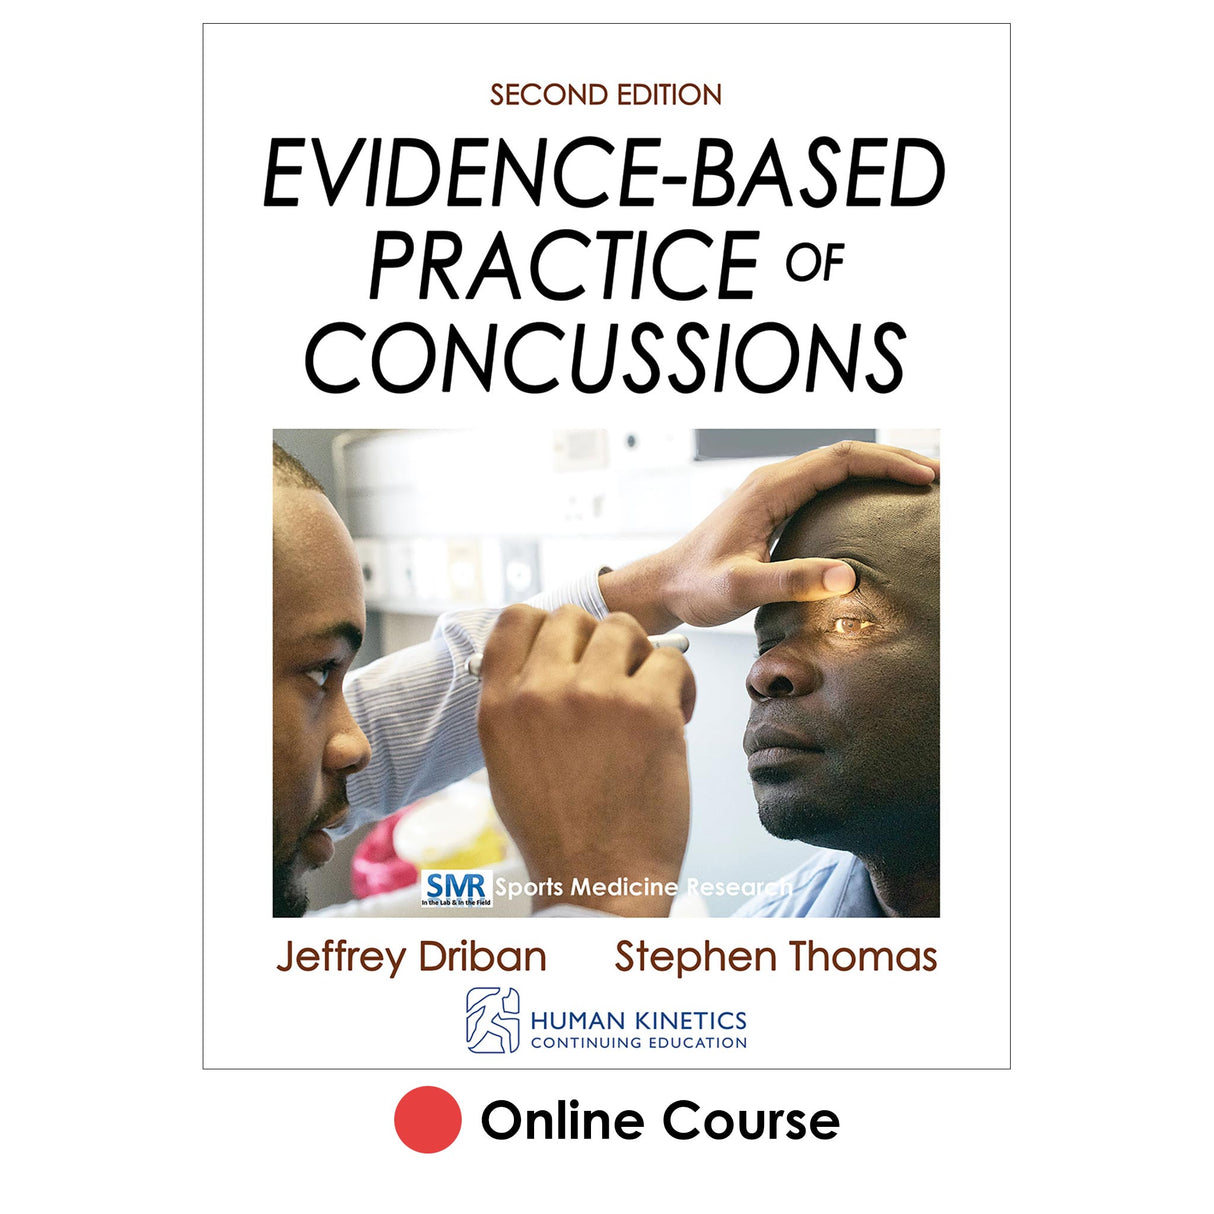 Evidence-Based Practice of Concussions 2nd Edition Online CE Course